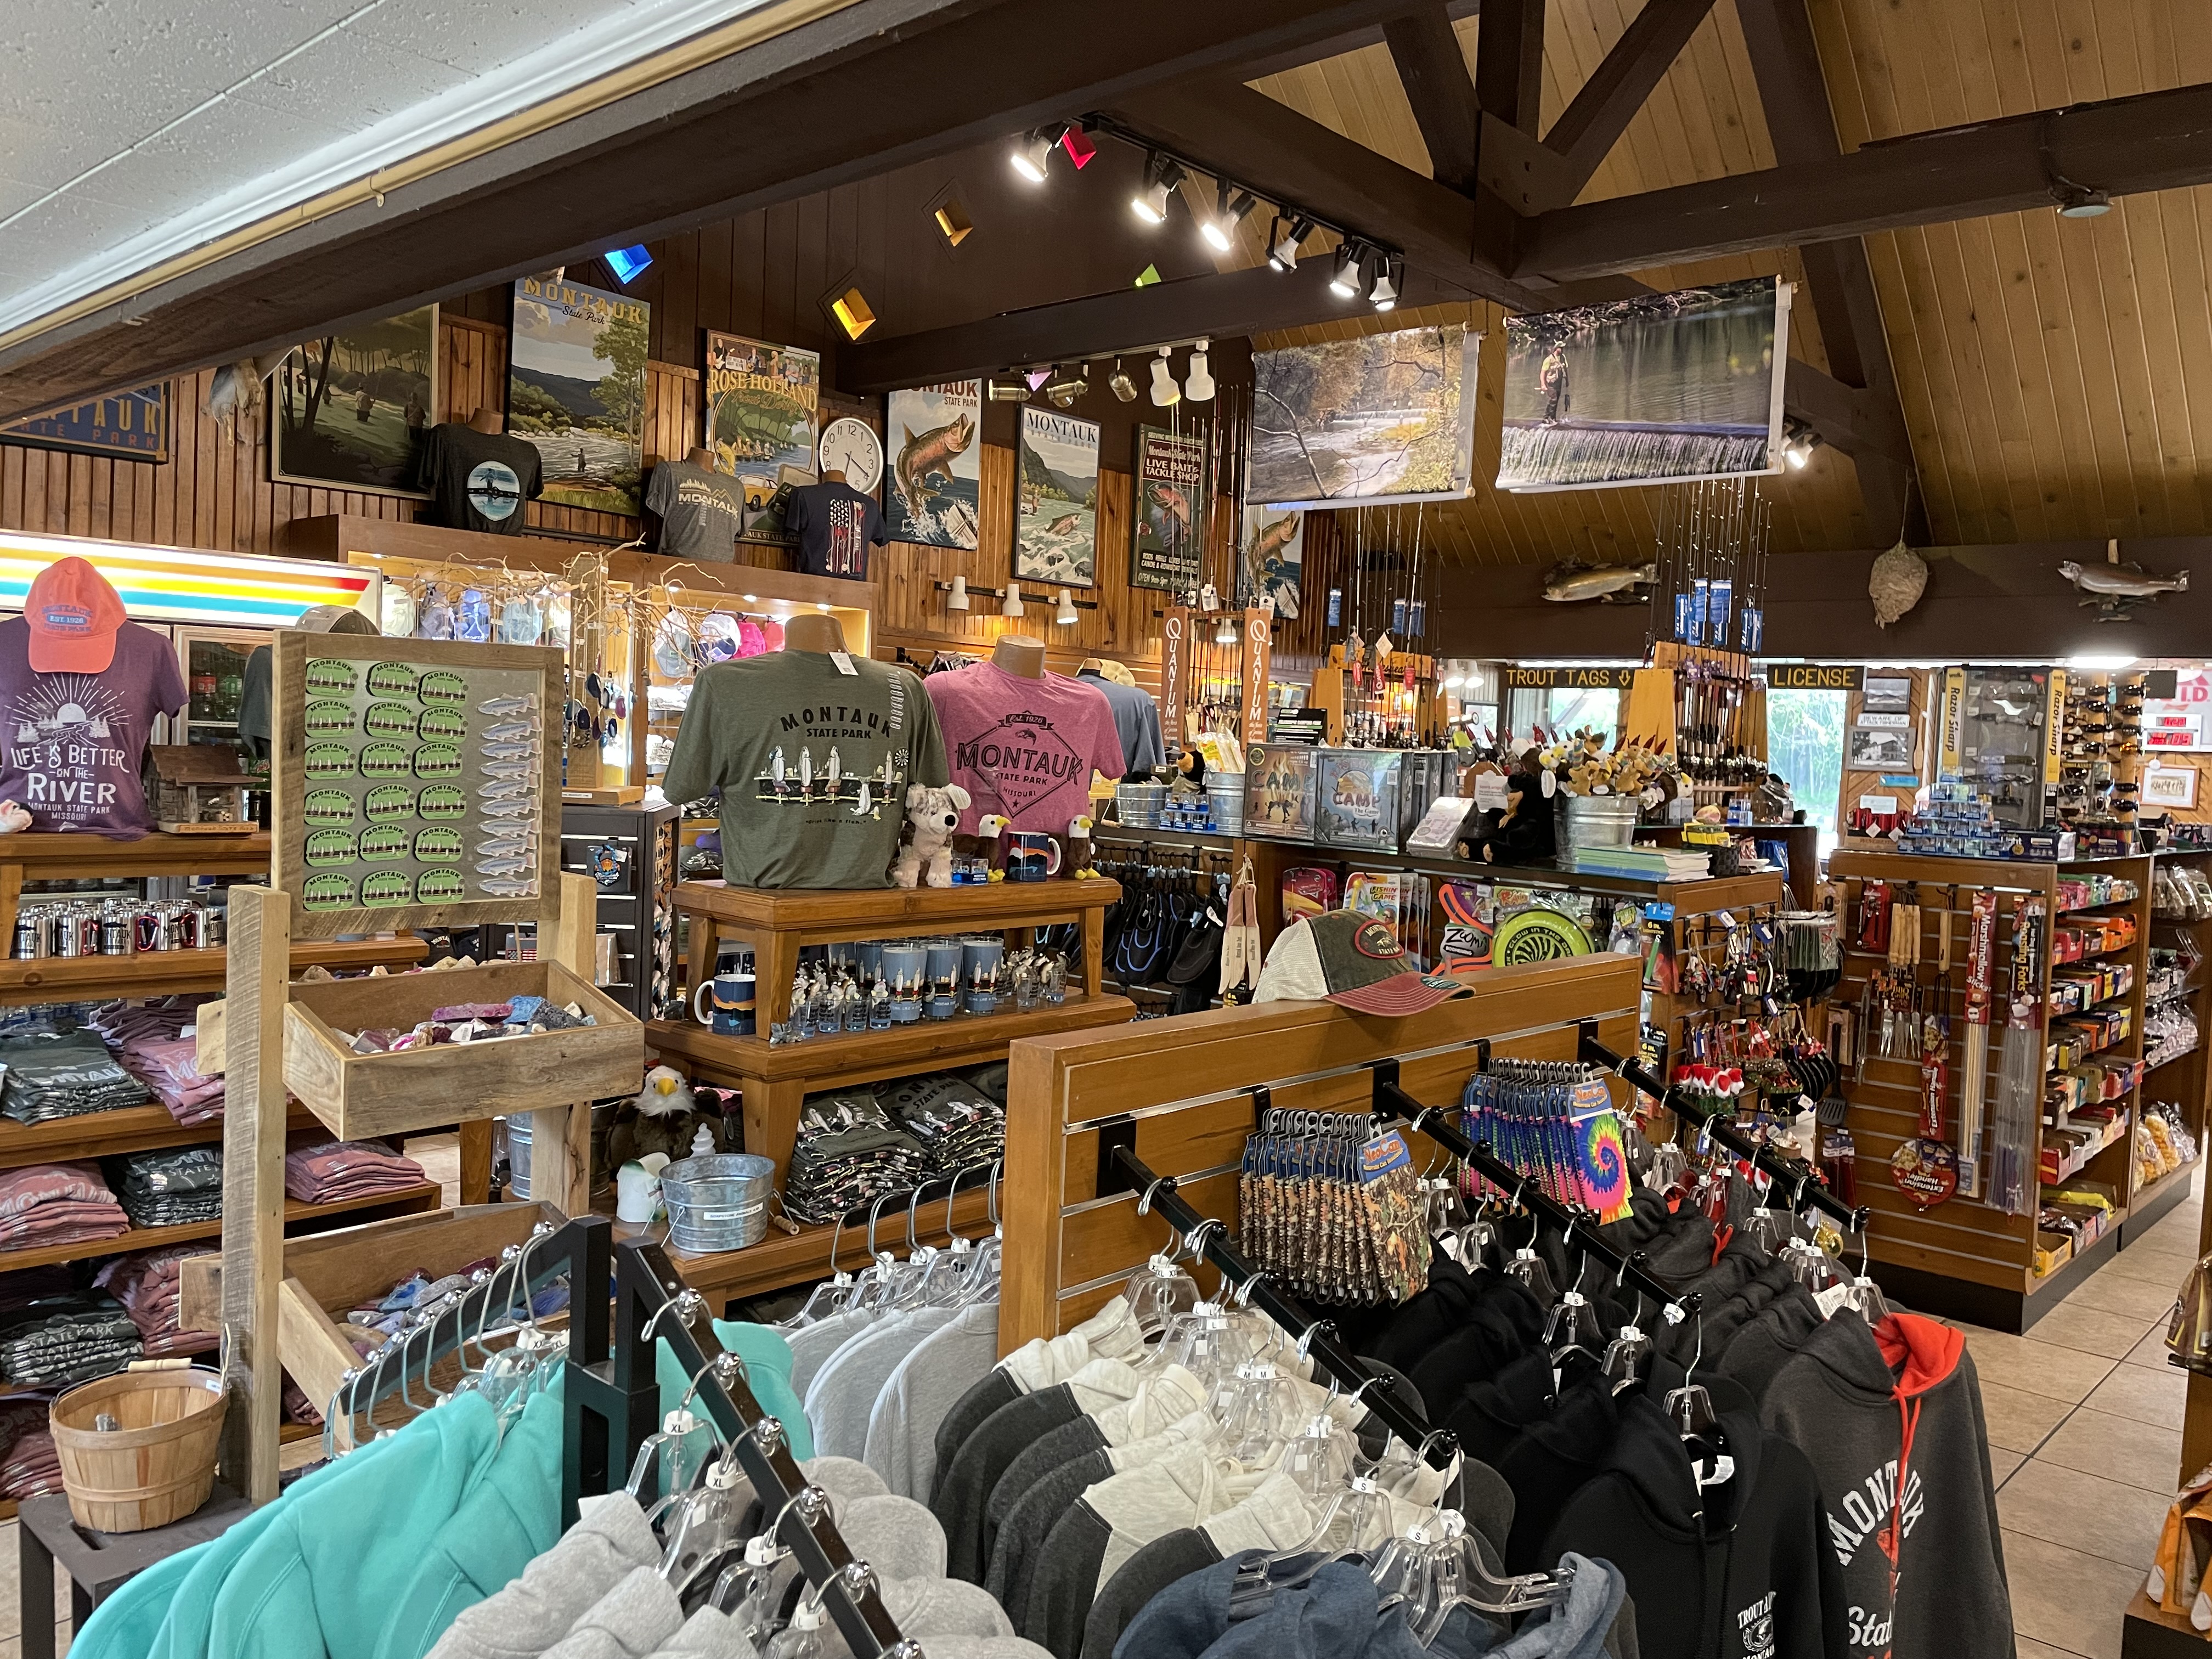 Apparel, fishing supplies and snacks inside the park store